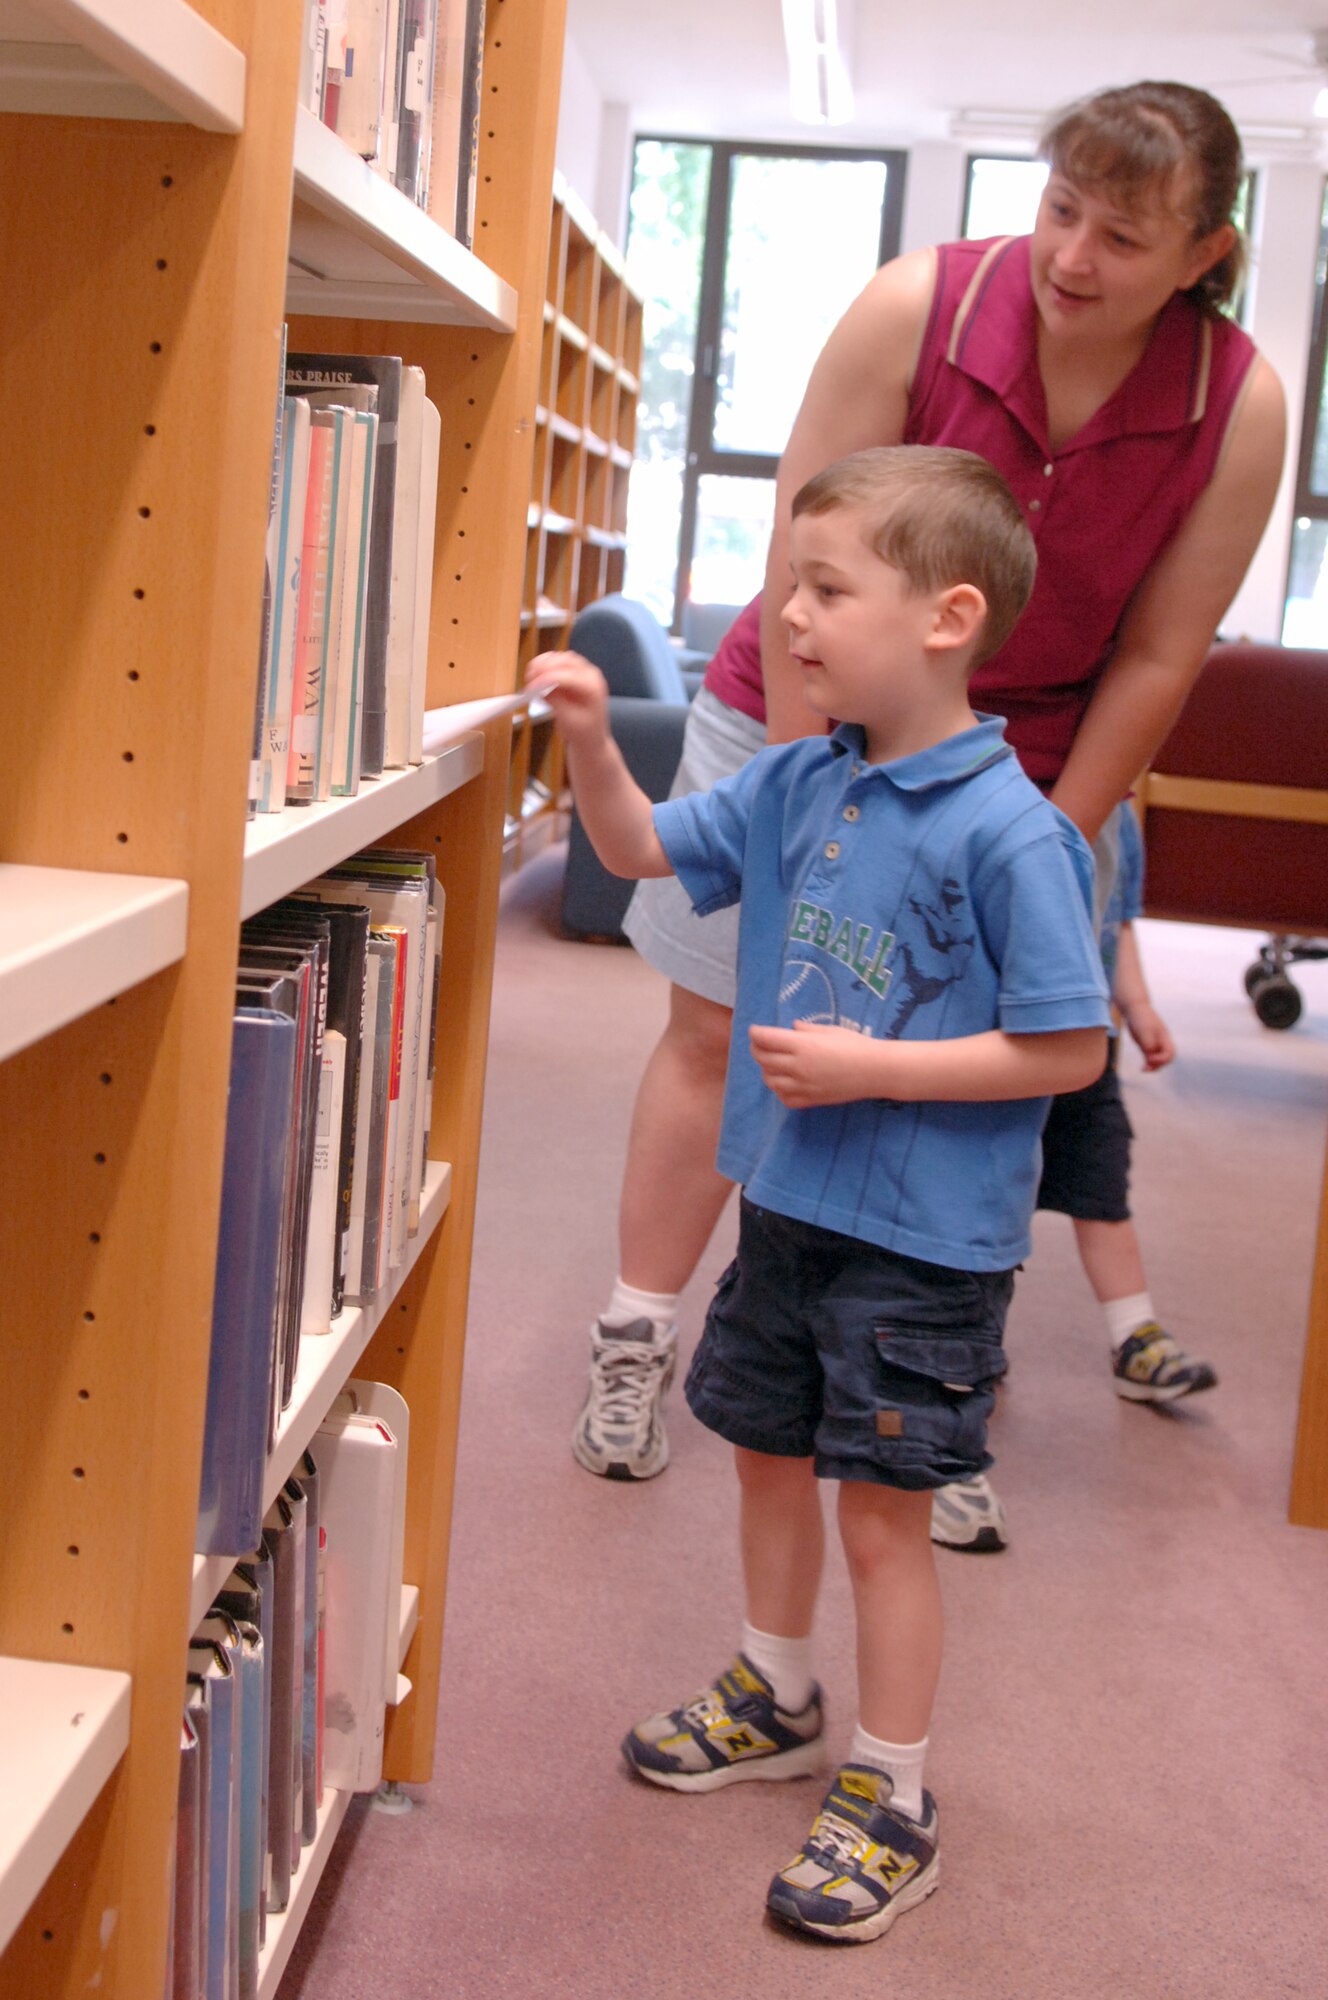 Brian Evans (front), son of U.S. Air Force Tech. Sgt. Jason Evans, U.S. Air Forces in Europe, and his aunt, Myra Fehr, find a piece of a dinosaur puzzle hidden among the library books, June 18, 2009, Ramstein Air Base, Germany. Evans, along with other children, hunted for puzzle pieces during story time as part of the summer reading program. (U.S. Air Force photo by Senior Airman Amanda Dick)